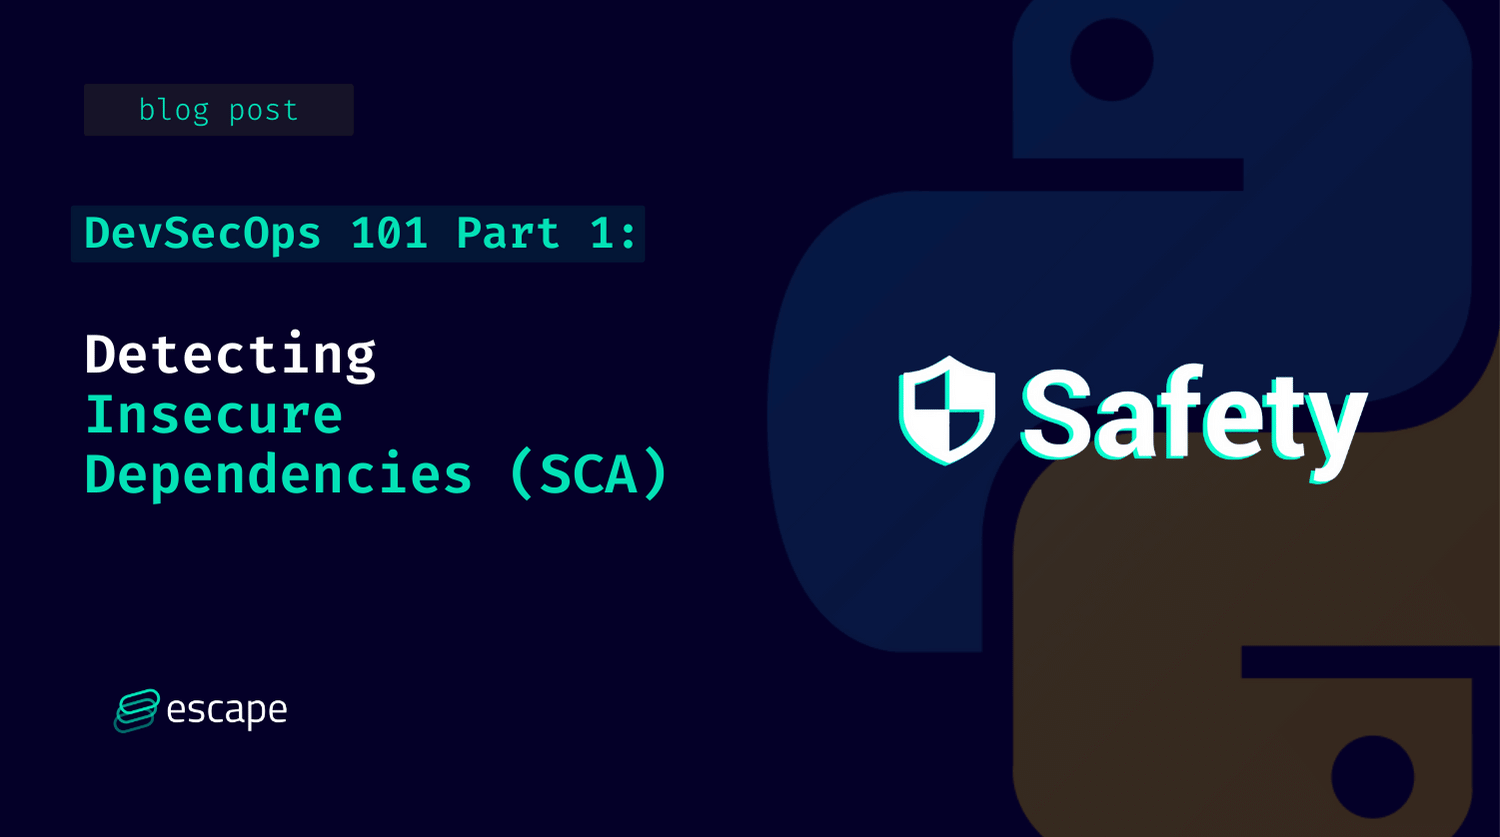 DevSecOps 101 part 1: Software Component Analysis (SCA)